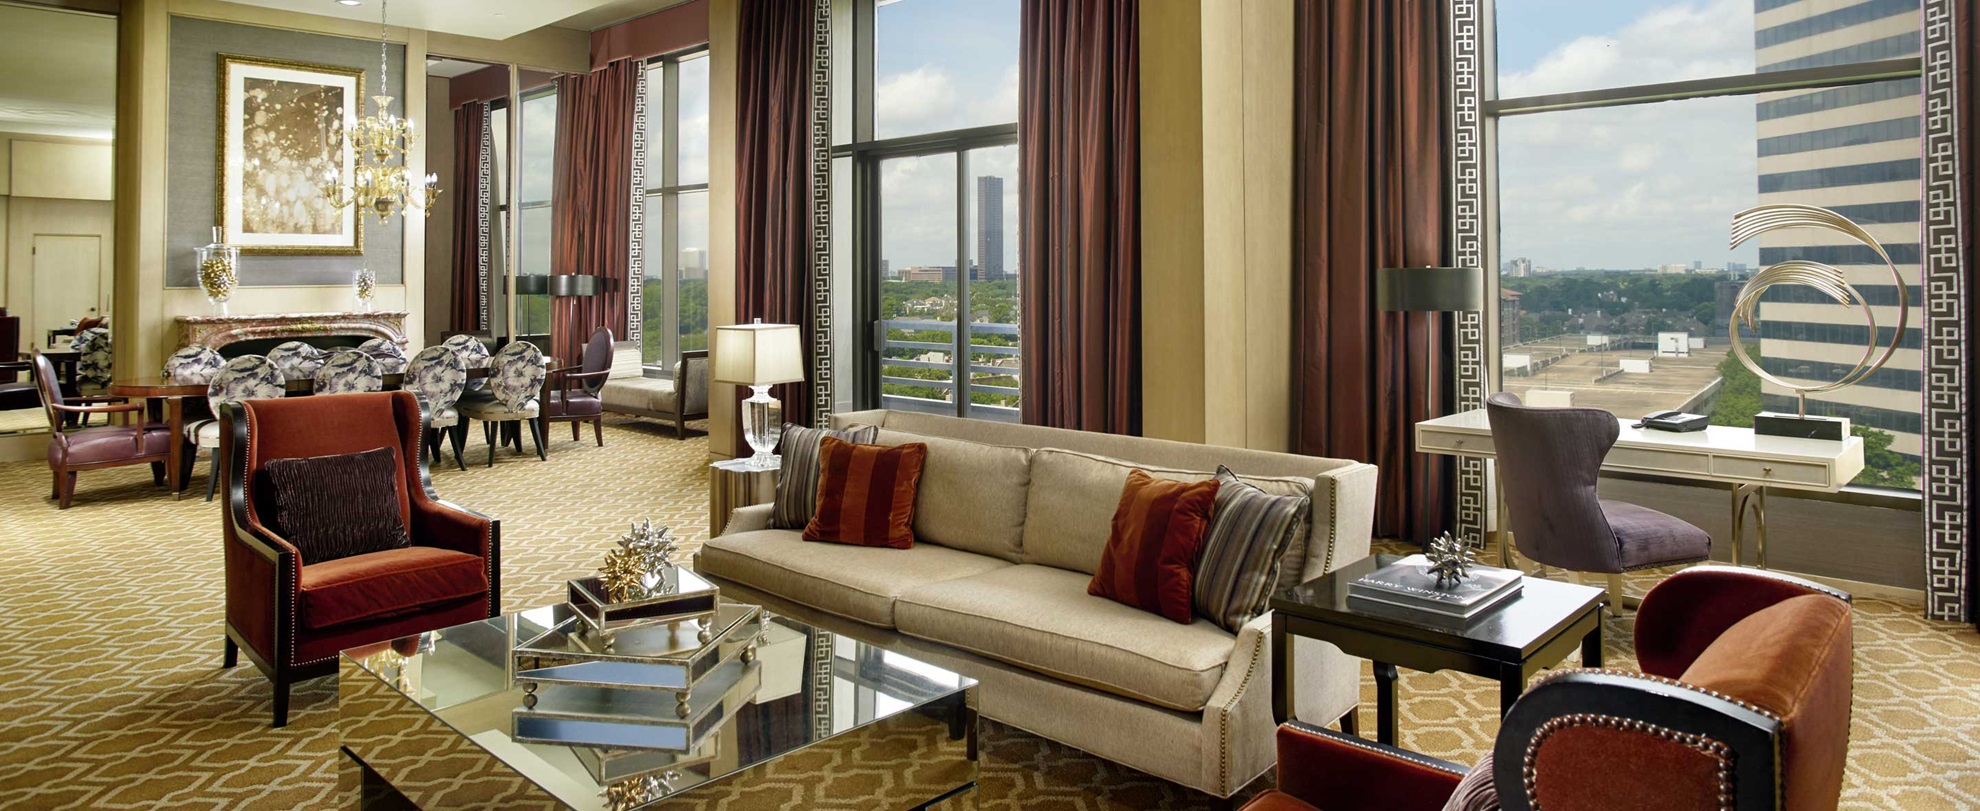 Presidential Suite with view.